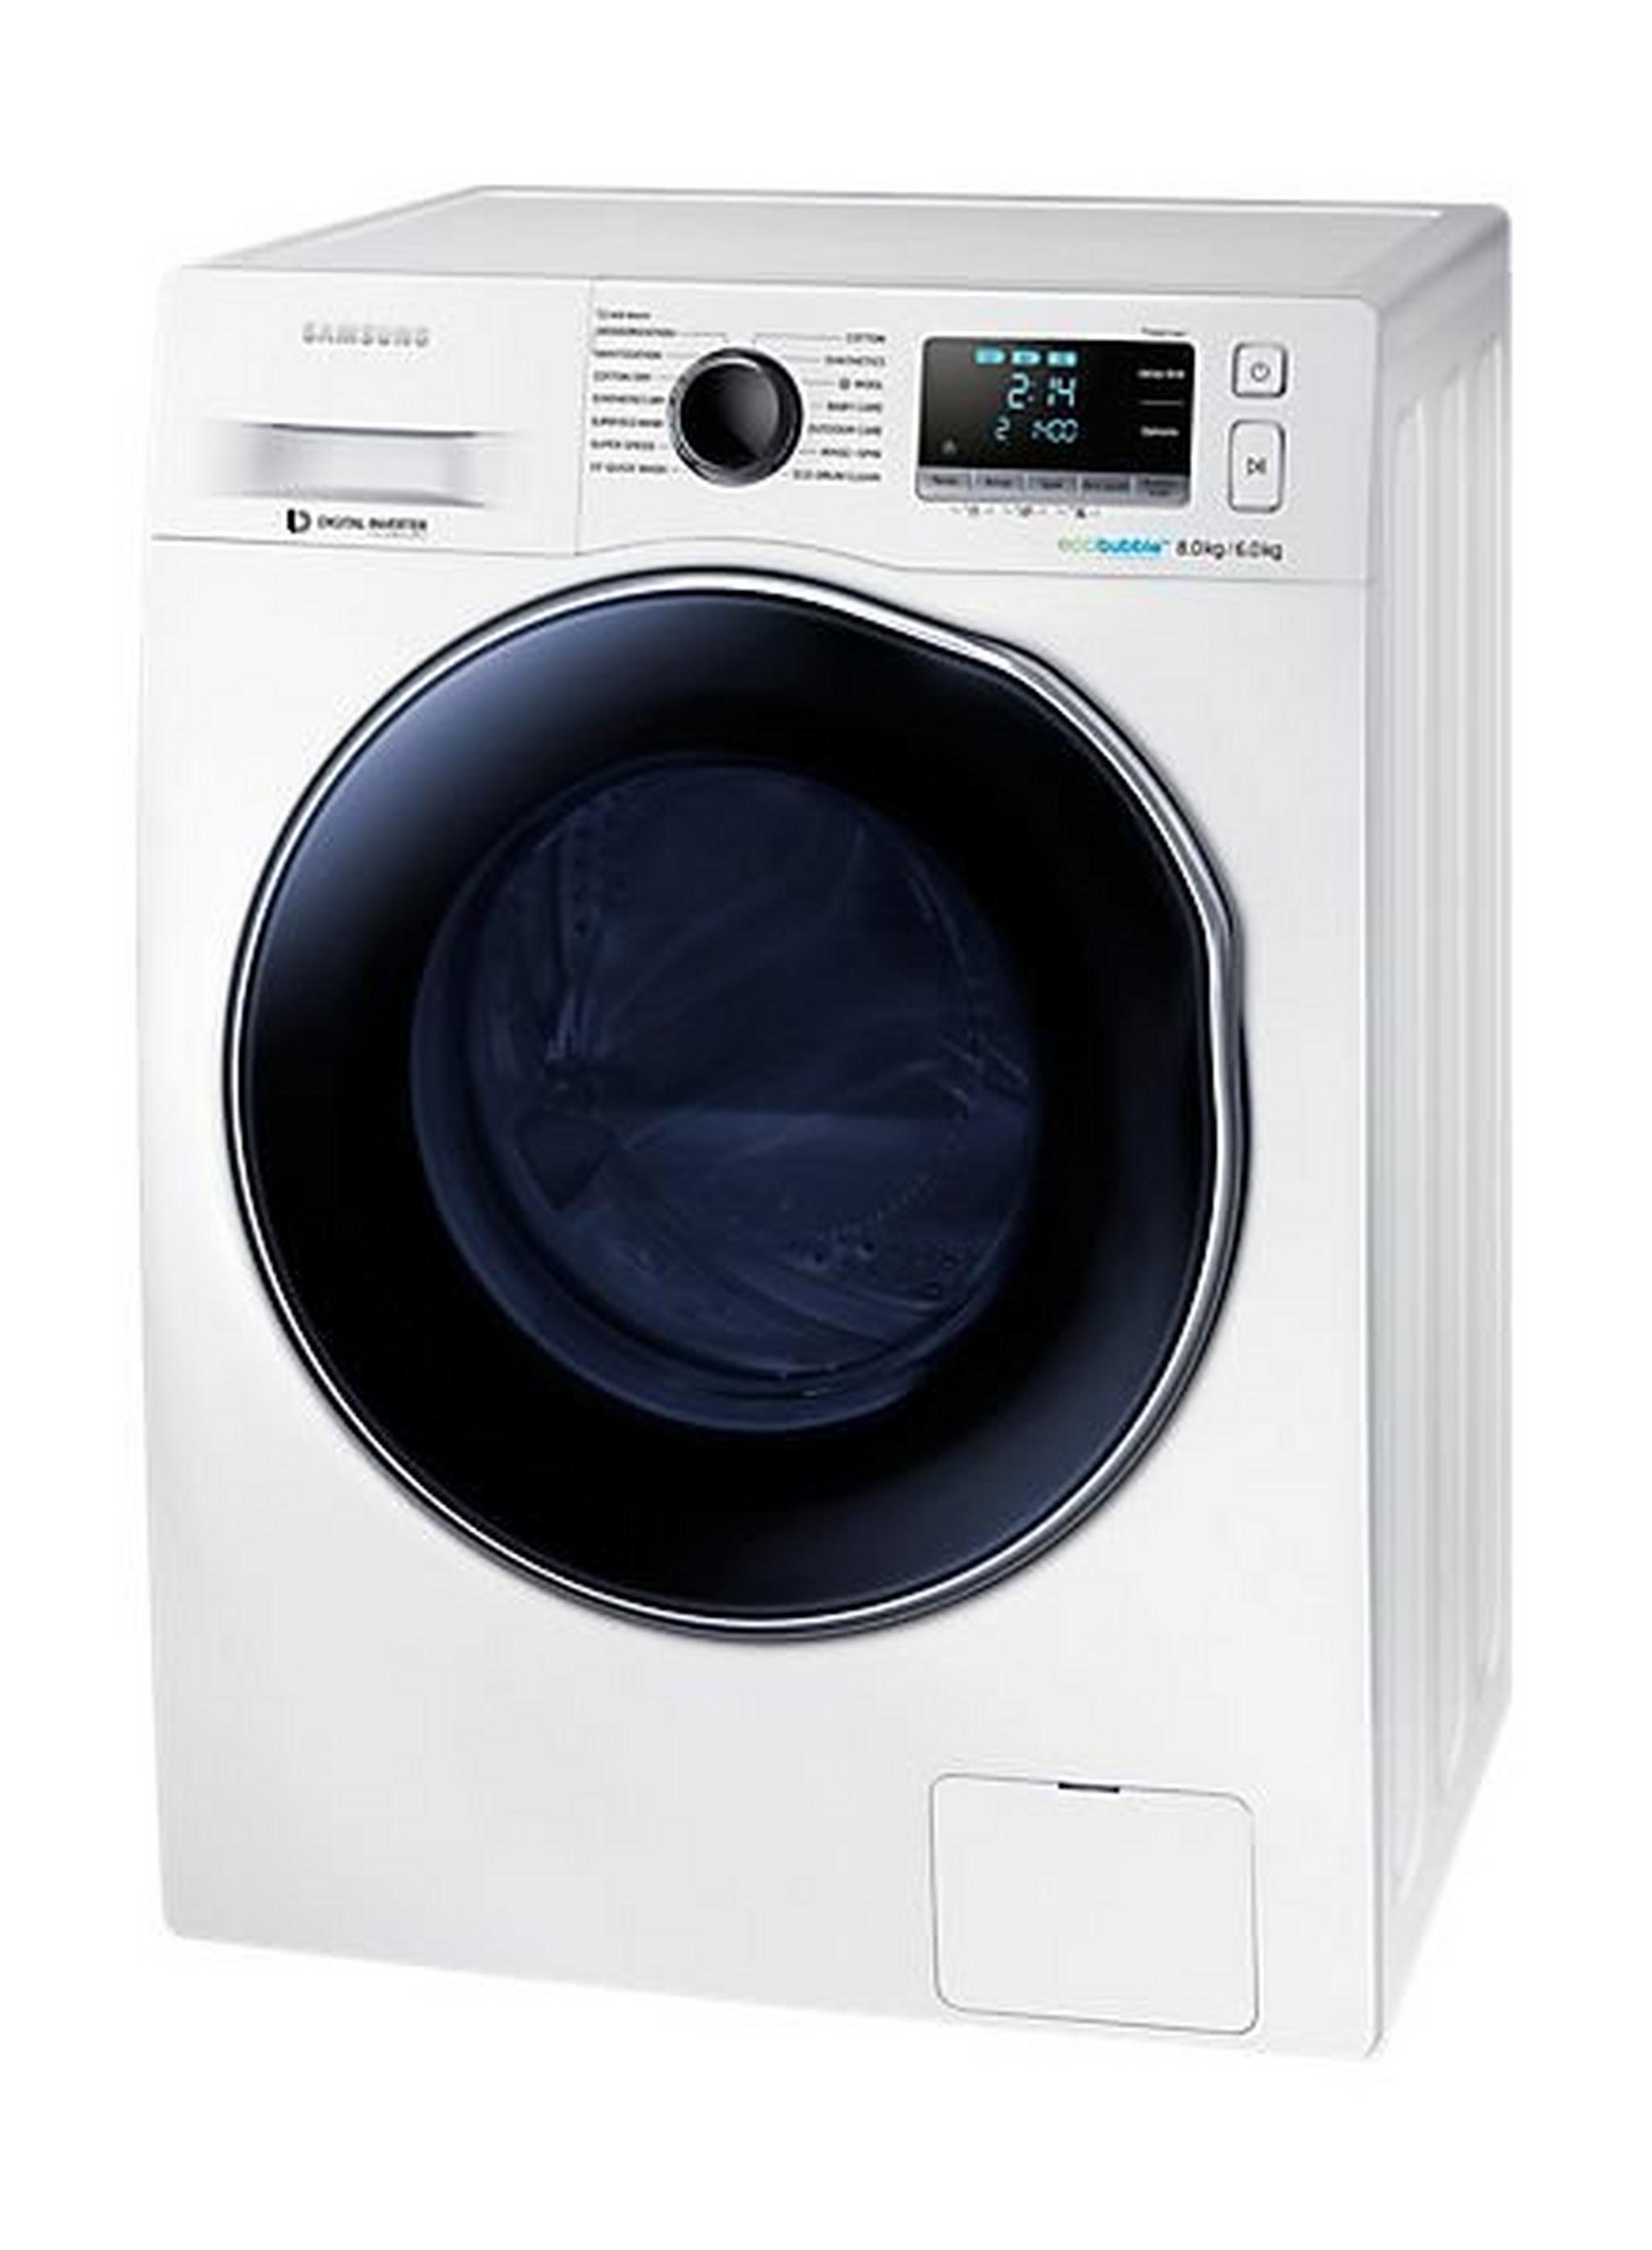 Samsung 8/6 Kg Front Load Washer Dryer with Eco bubble (WD80J6410AW) – White